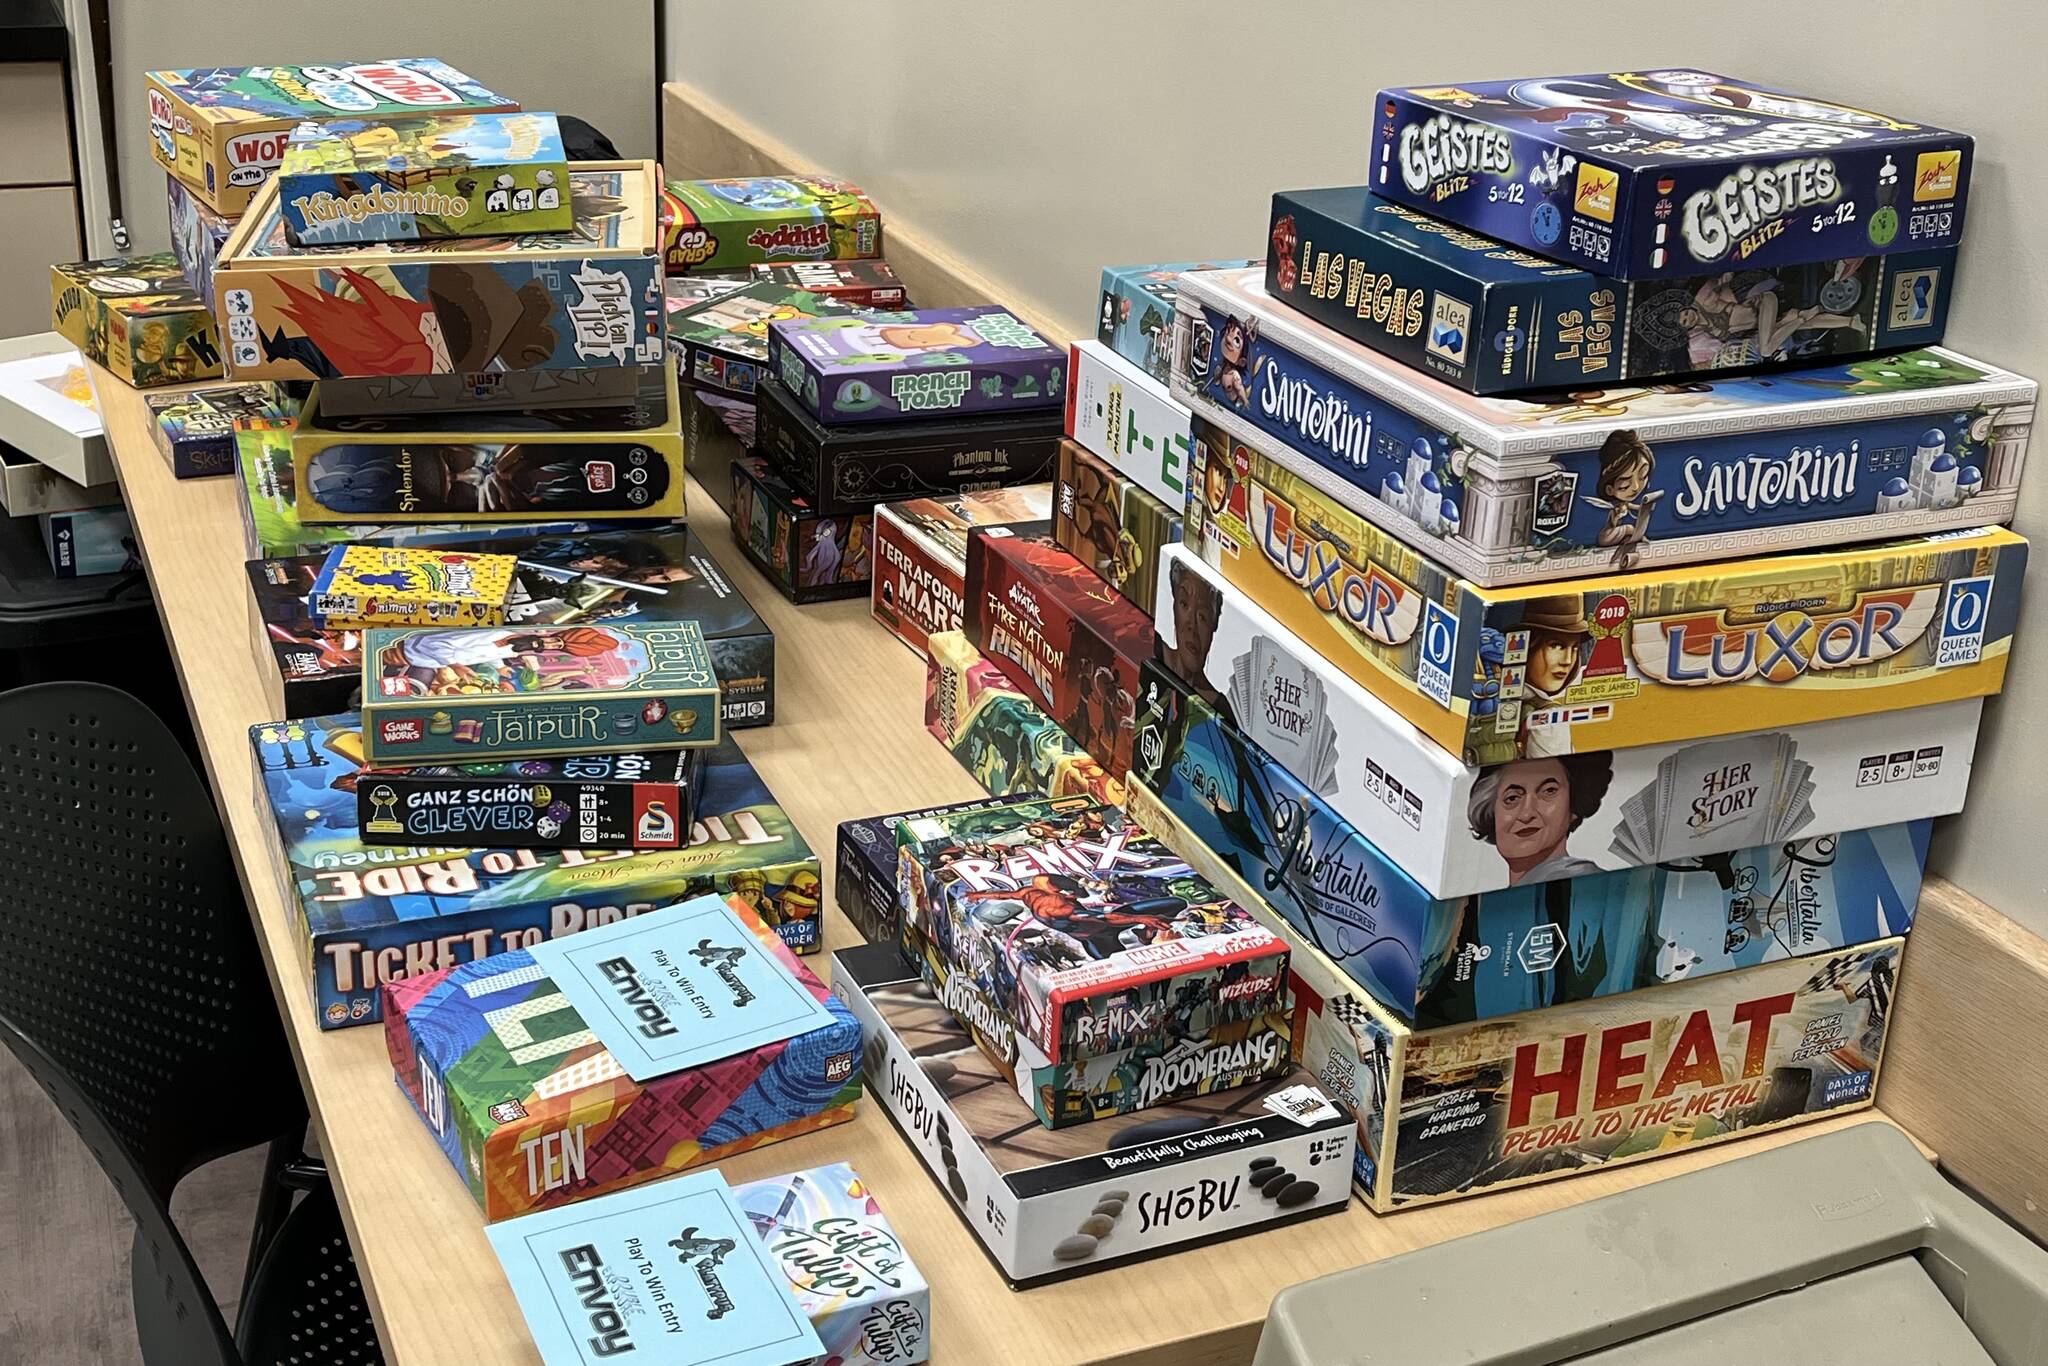 Juneau residents choose from a wide variety of games, seen here, on Saturday during Platypus Gamings mini-convention at Juneau Public Libraries over the weekend. (Jonson Kuhn / Juneau Empire)